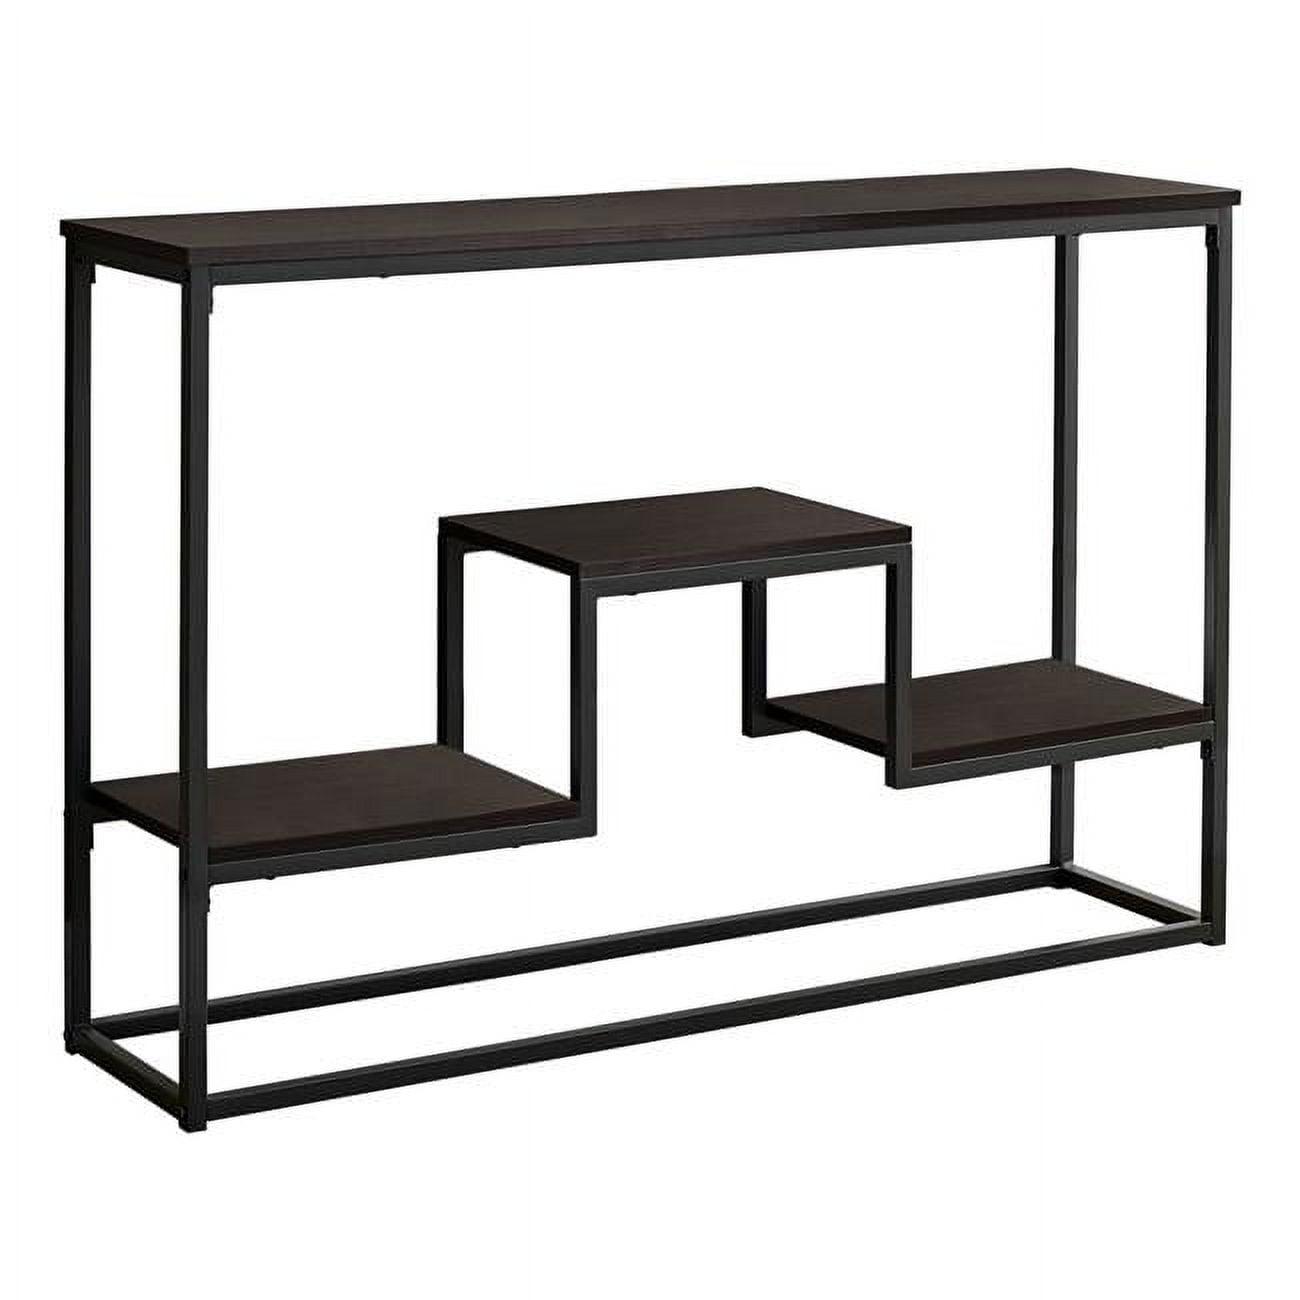 Espresso Multi-Level Metal & Wood Console Table with Storage